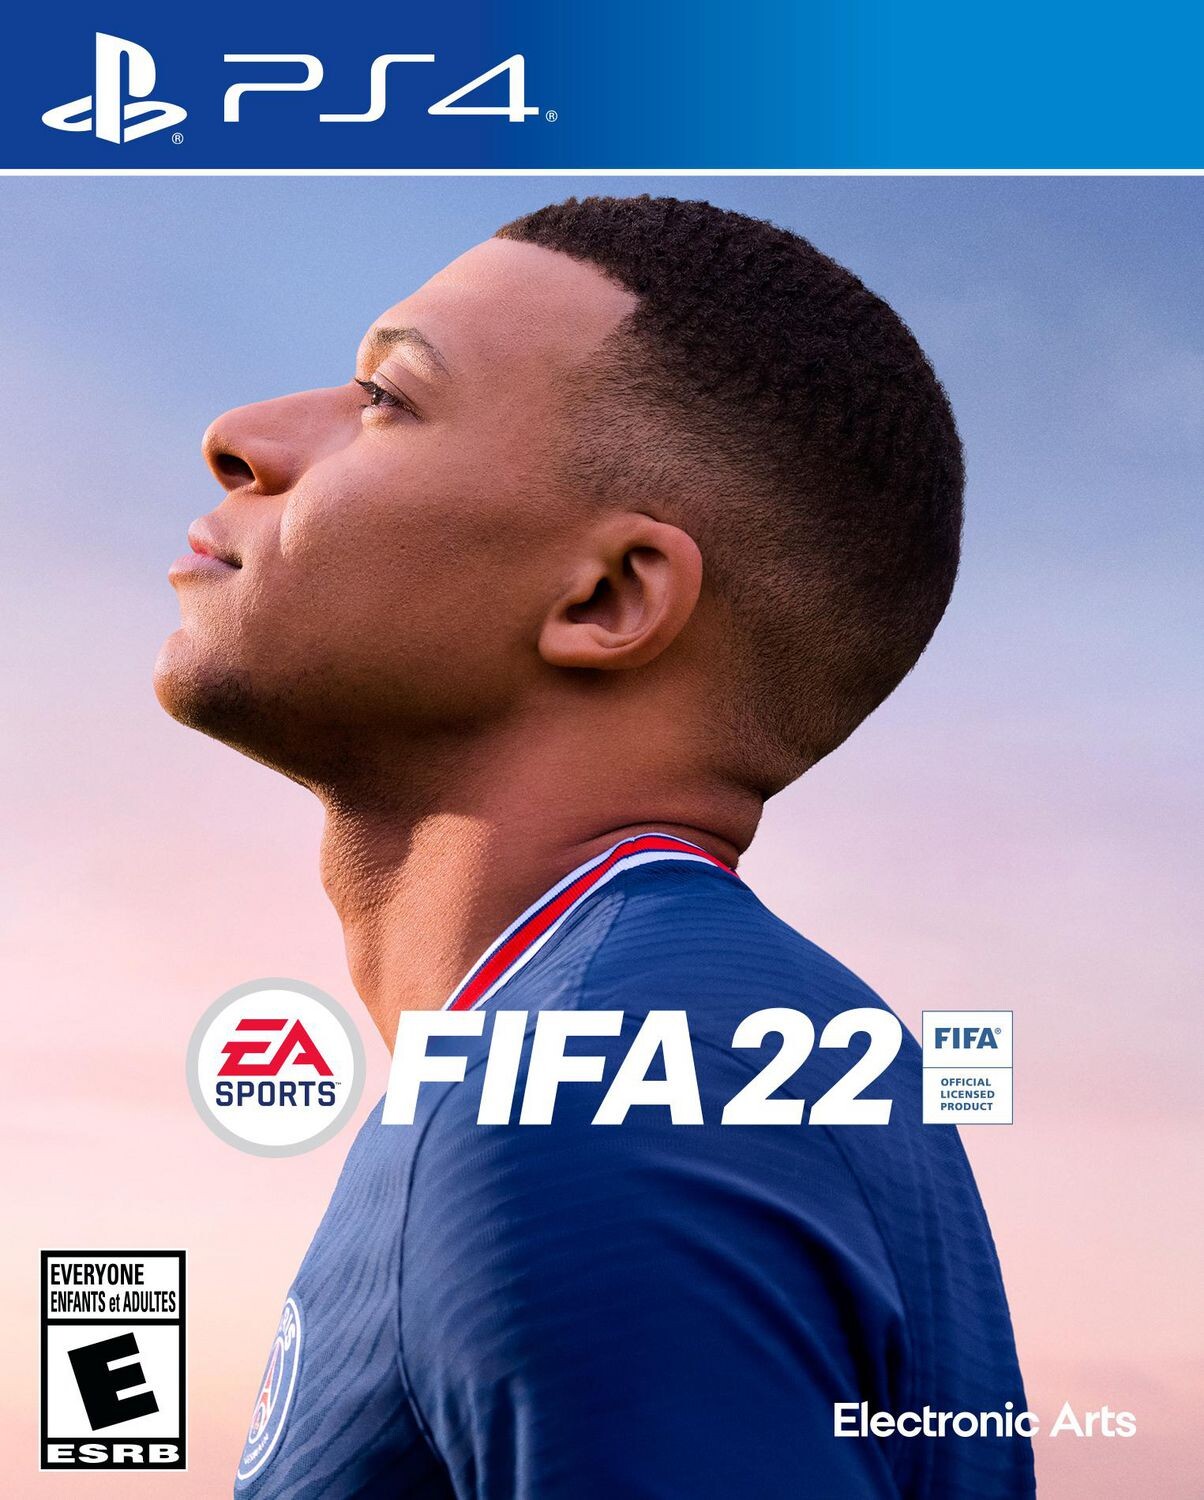 FIFA 22 is accessible on multiple platforms, including PlayStation 4, PlayStation 5, Xbox One, Xbox Series X/S, Google Stadia, Nintendo Switch, and PC. I was supporting the asset pipeline to ensure seamless game launches across platforms.